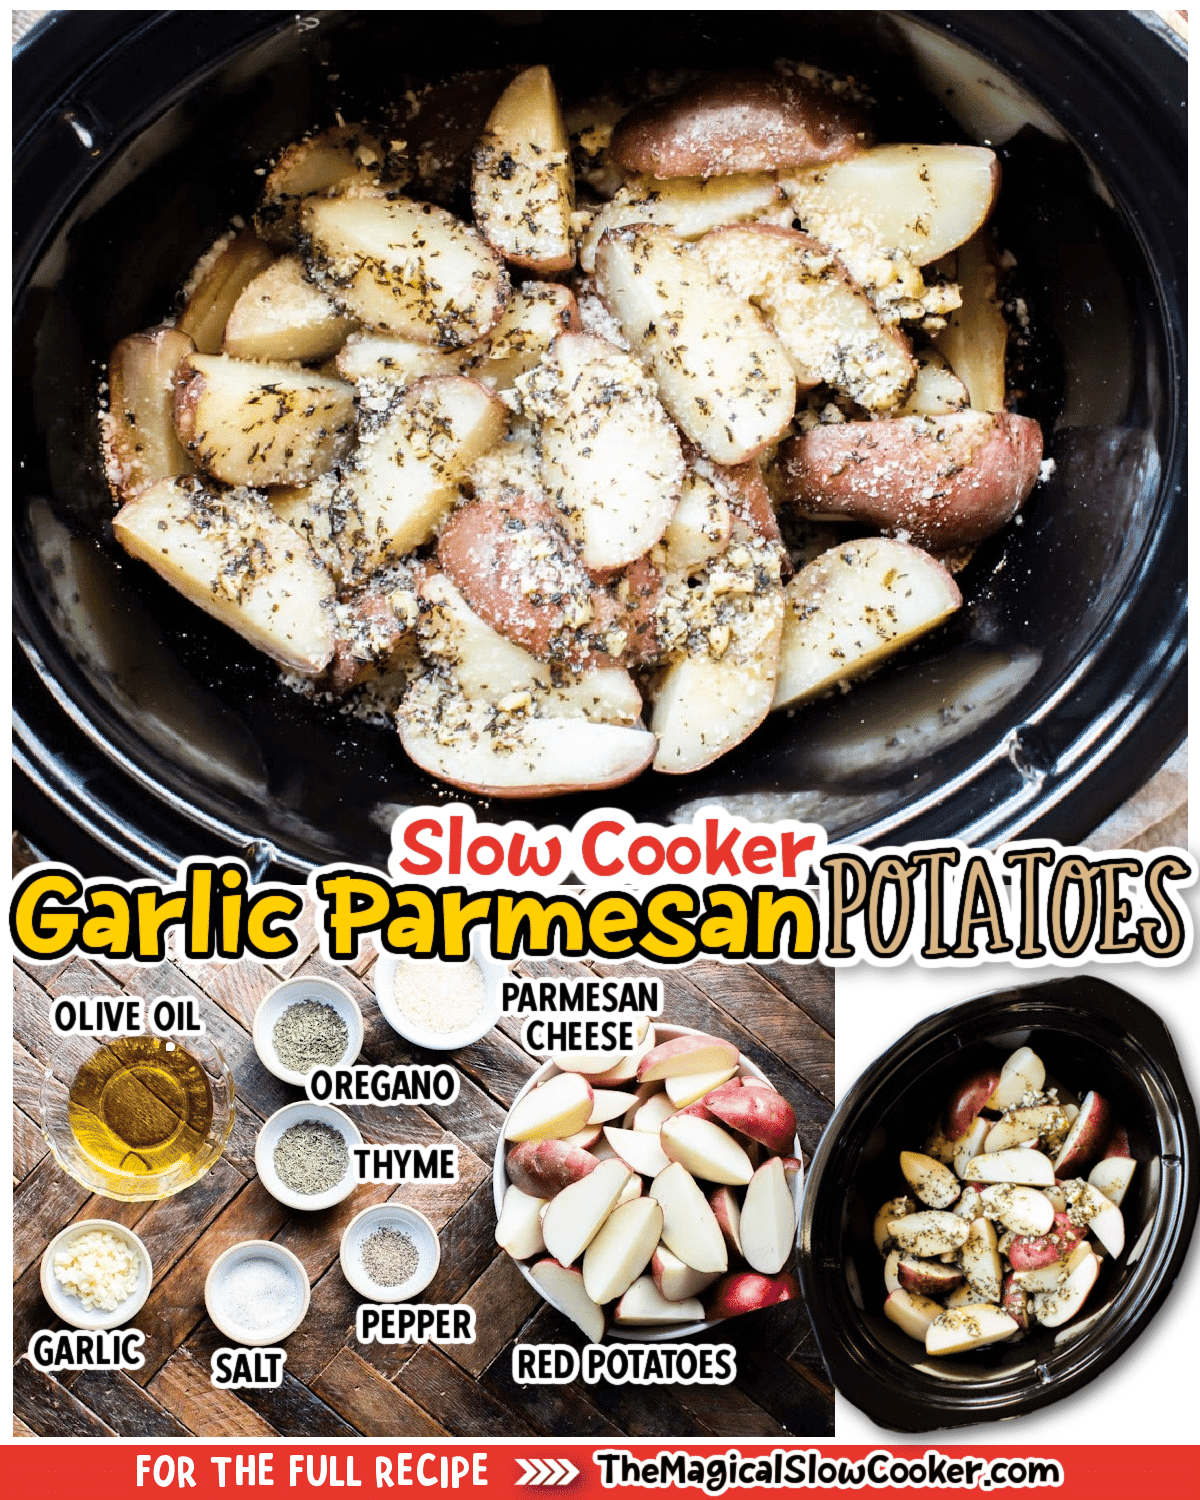 Collage of garlic parmesan potatoes images with text of what ingredients are.